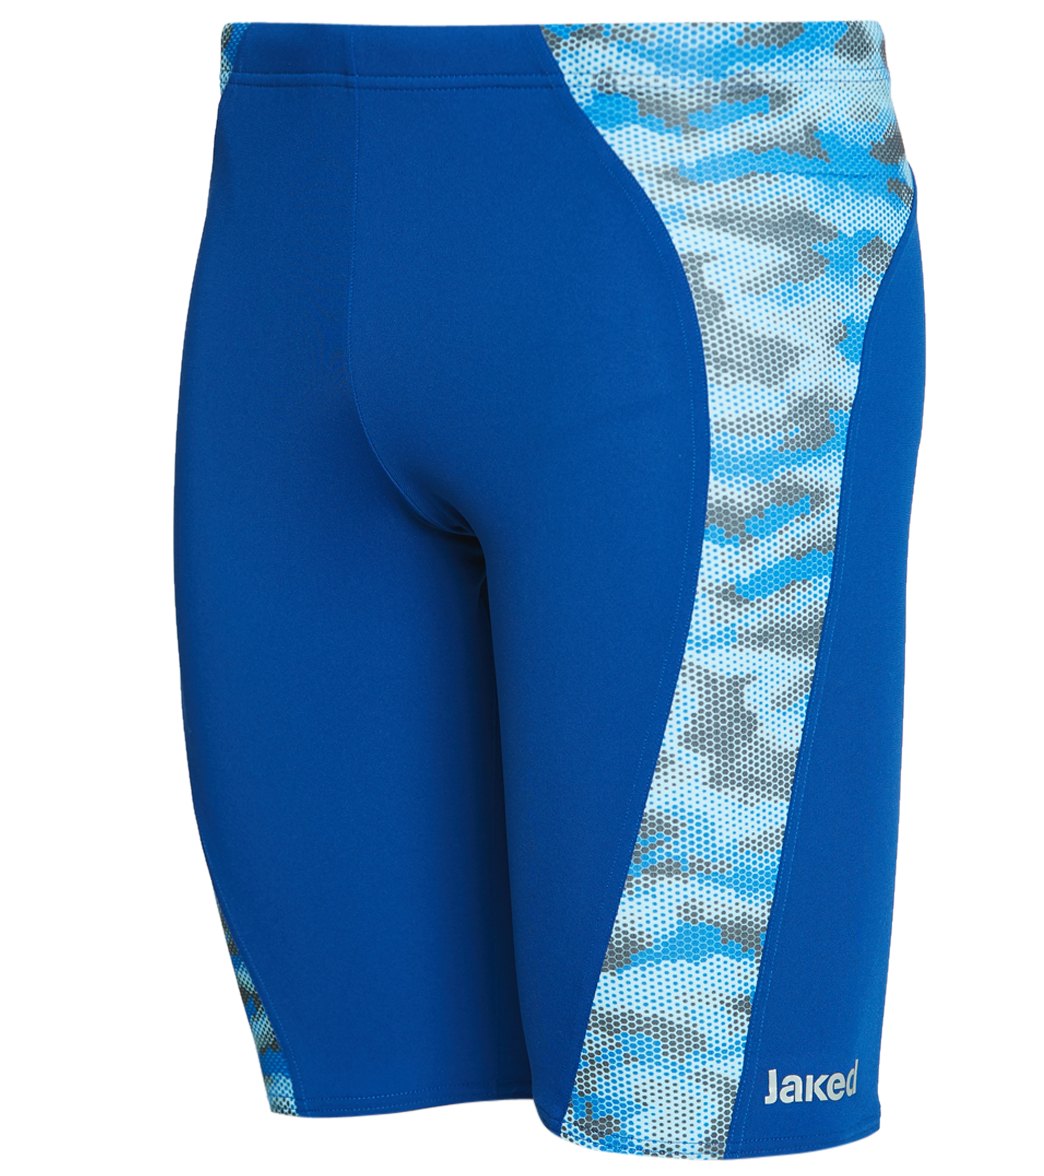 Jaked Men's Pixie Jammer Swimsuit at SwimOutlet.com